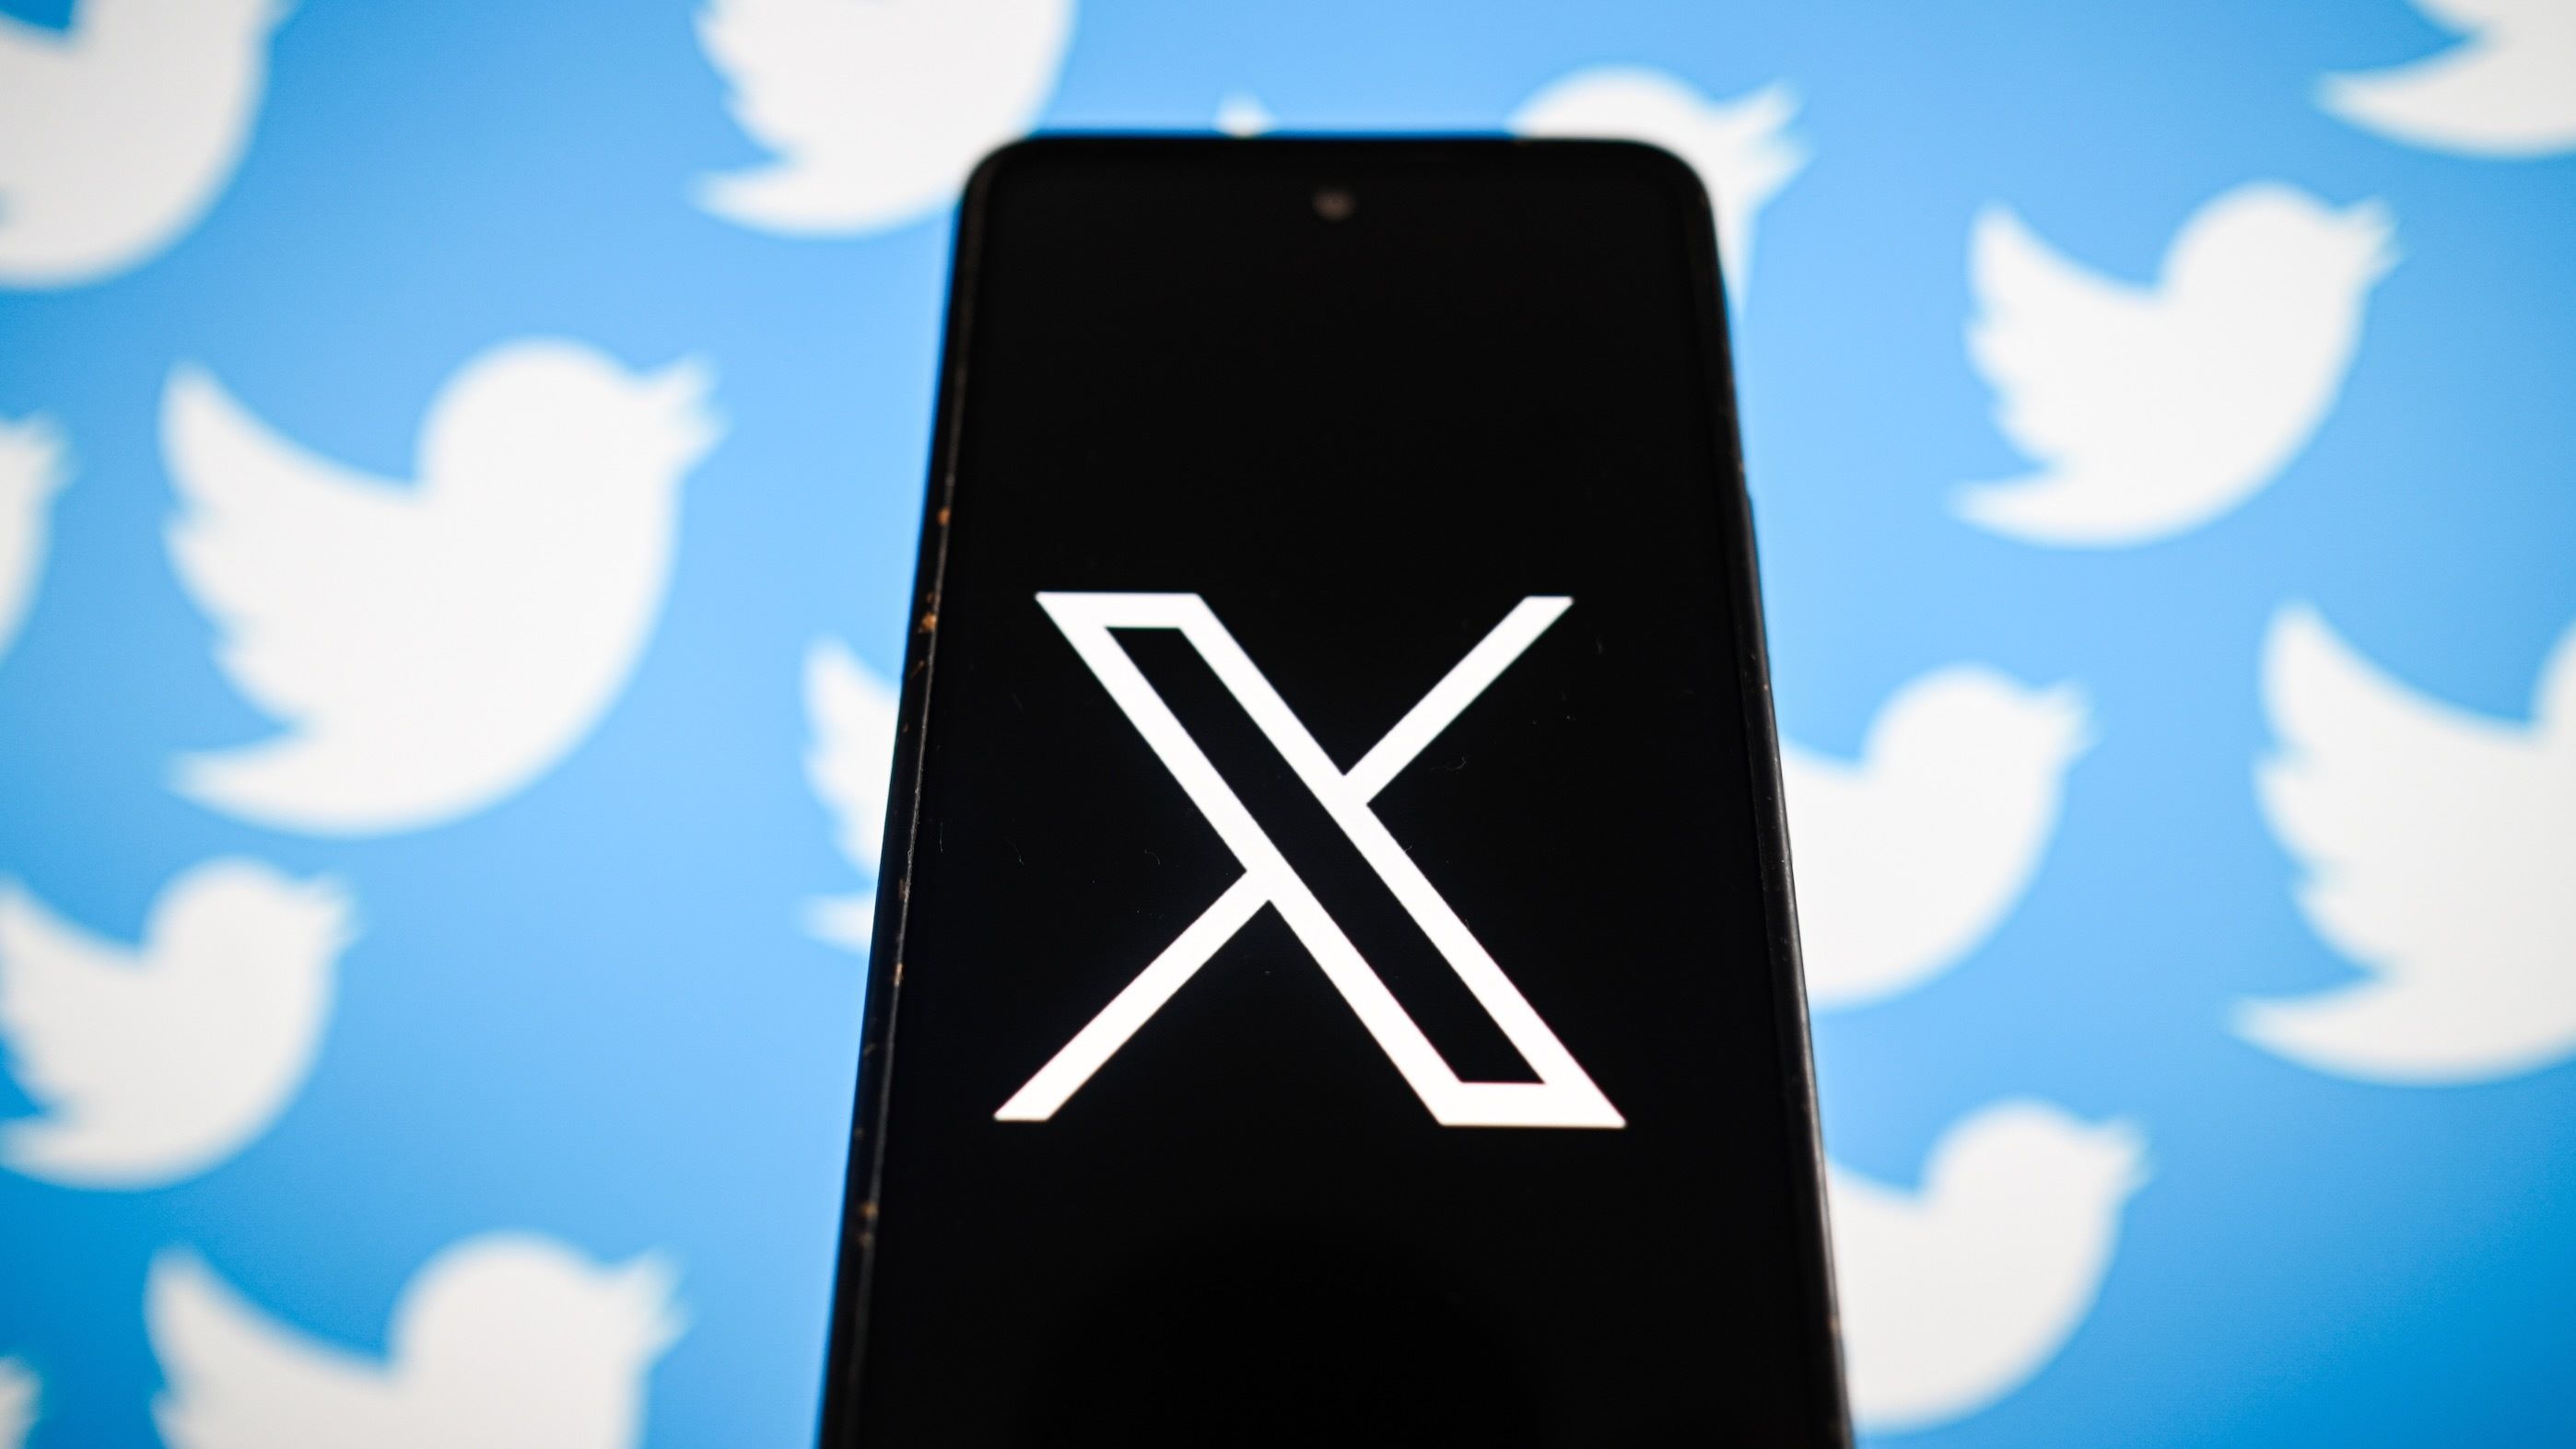 x-twitter-pays-20-million-to-creators-says-ceo